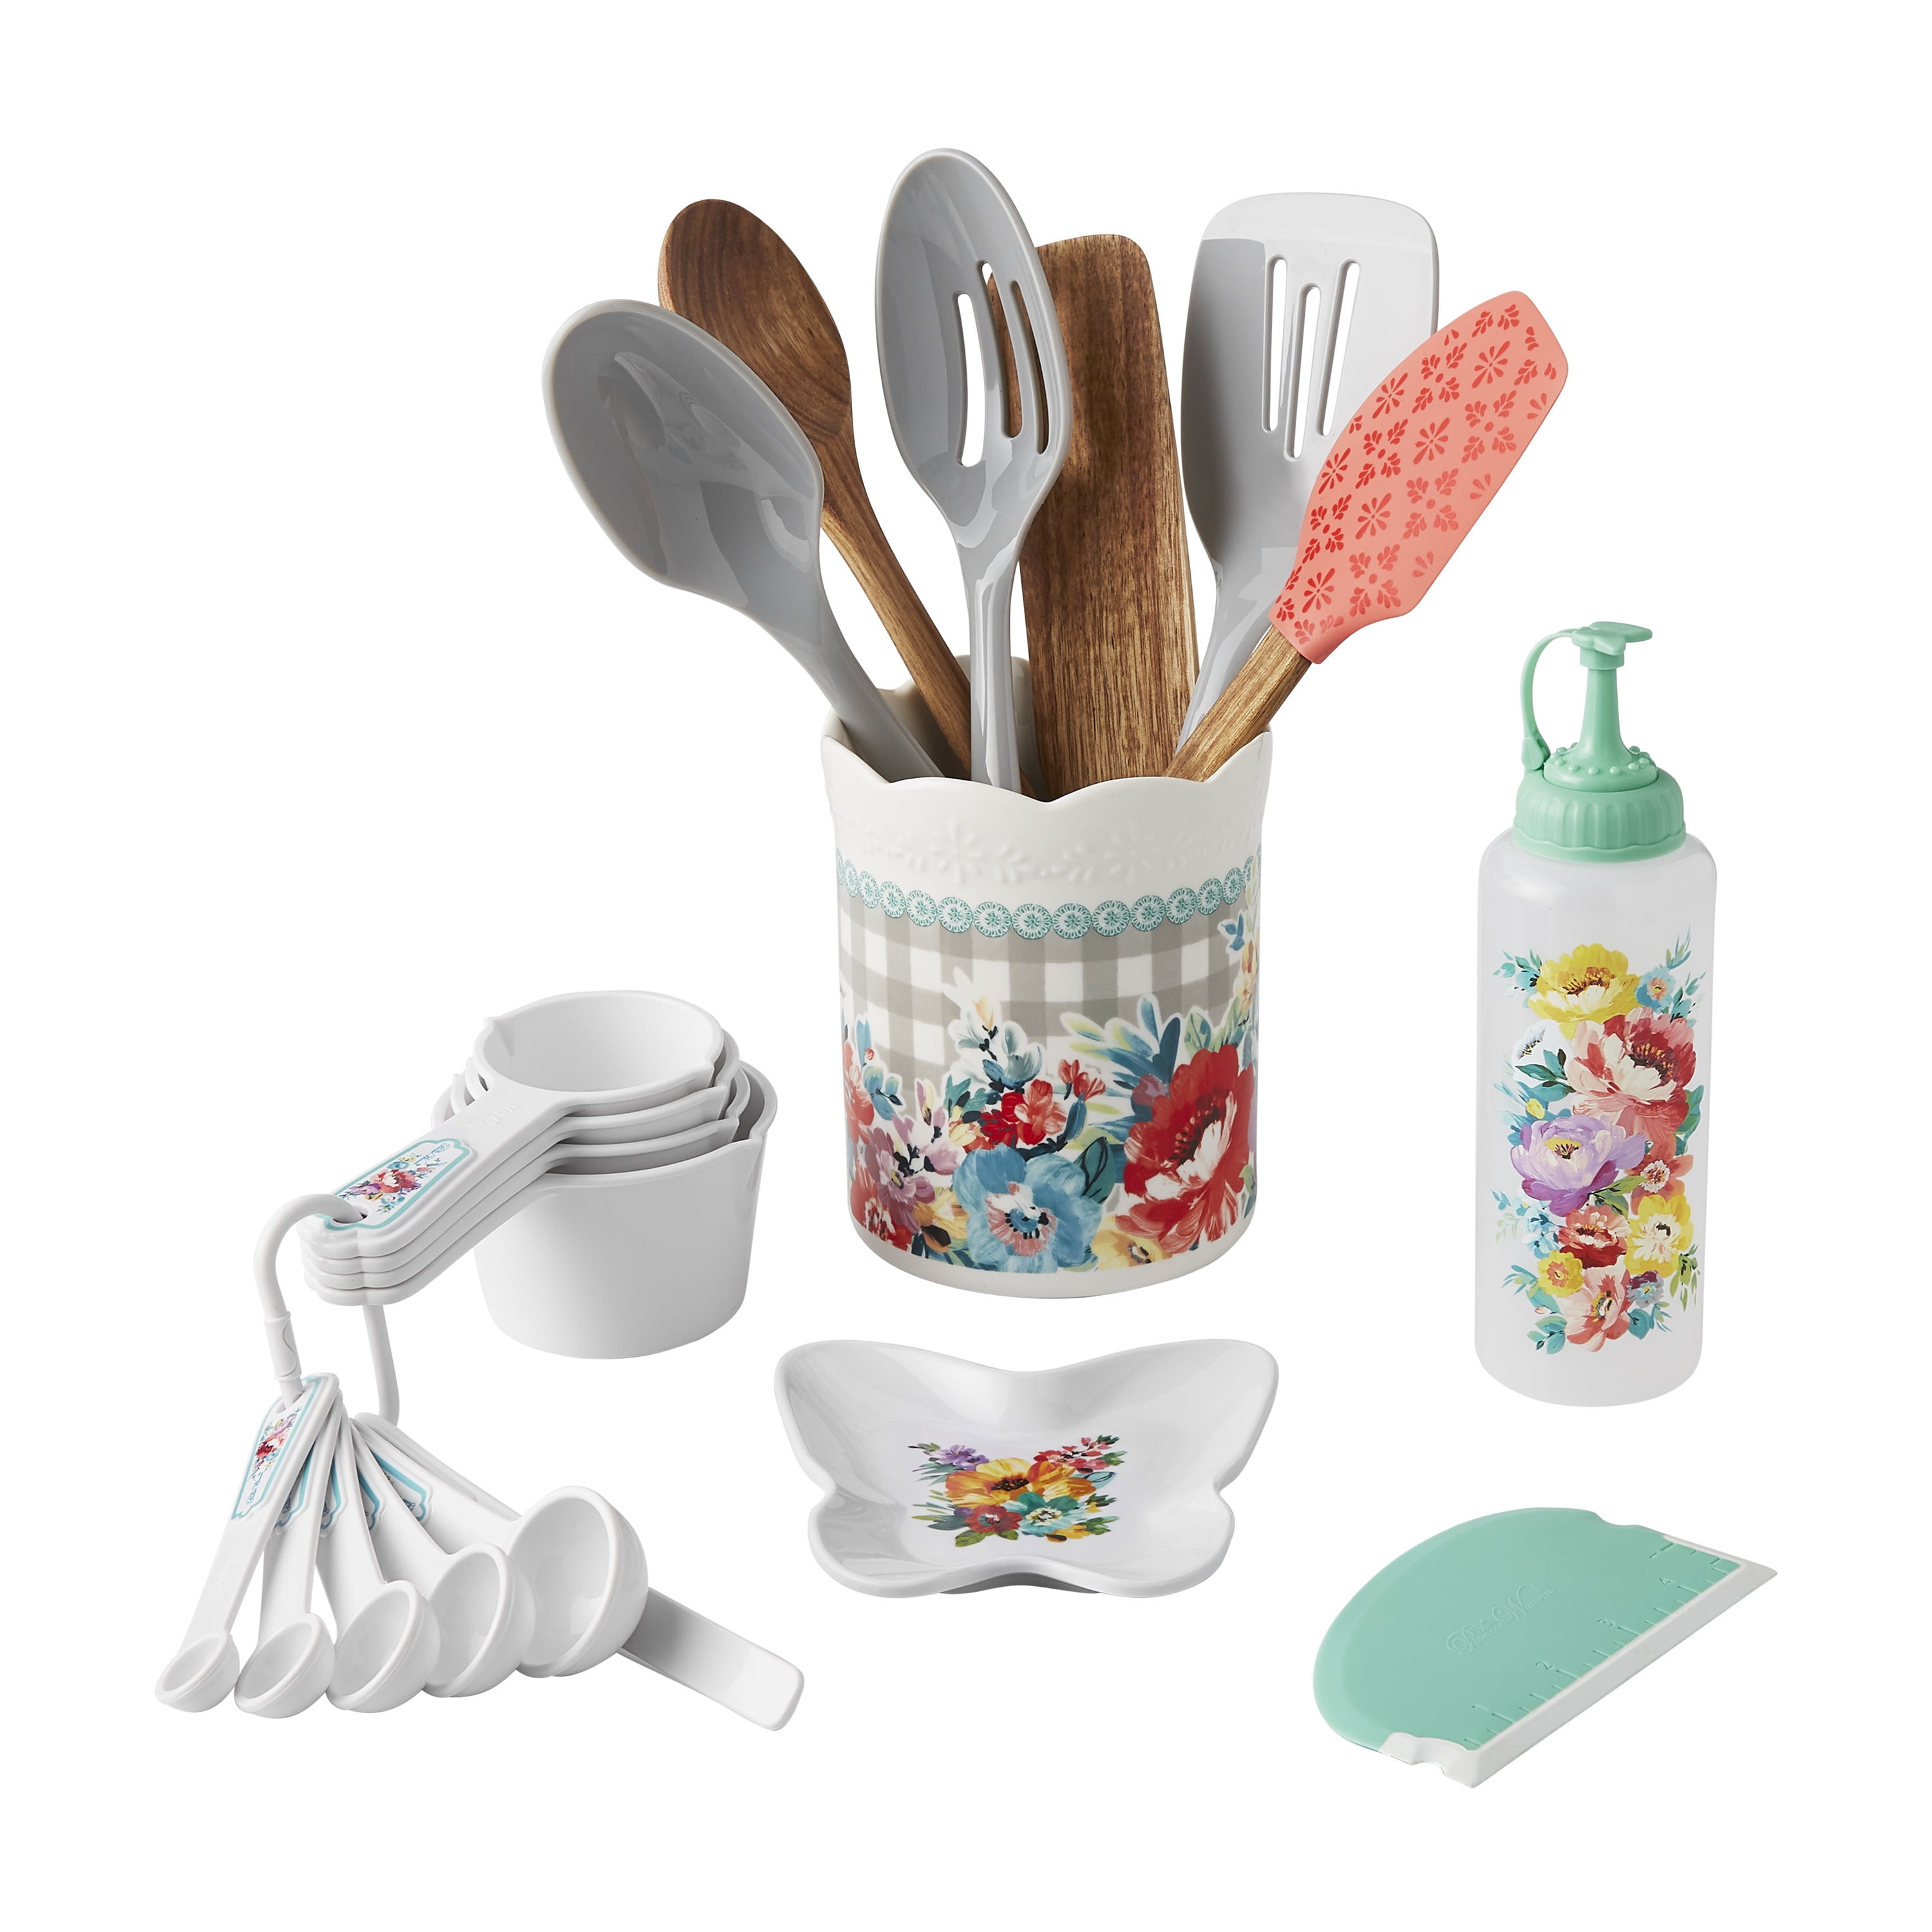 The Pioneer Woman Sweet Rose 3-Piece Kitchen Set